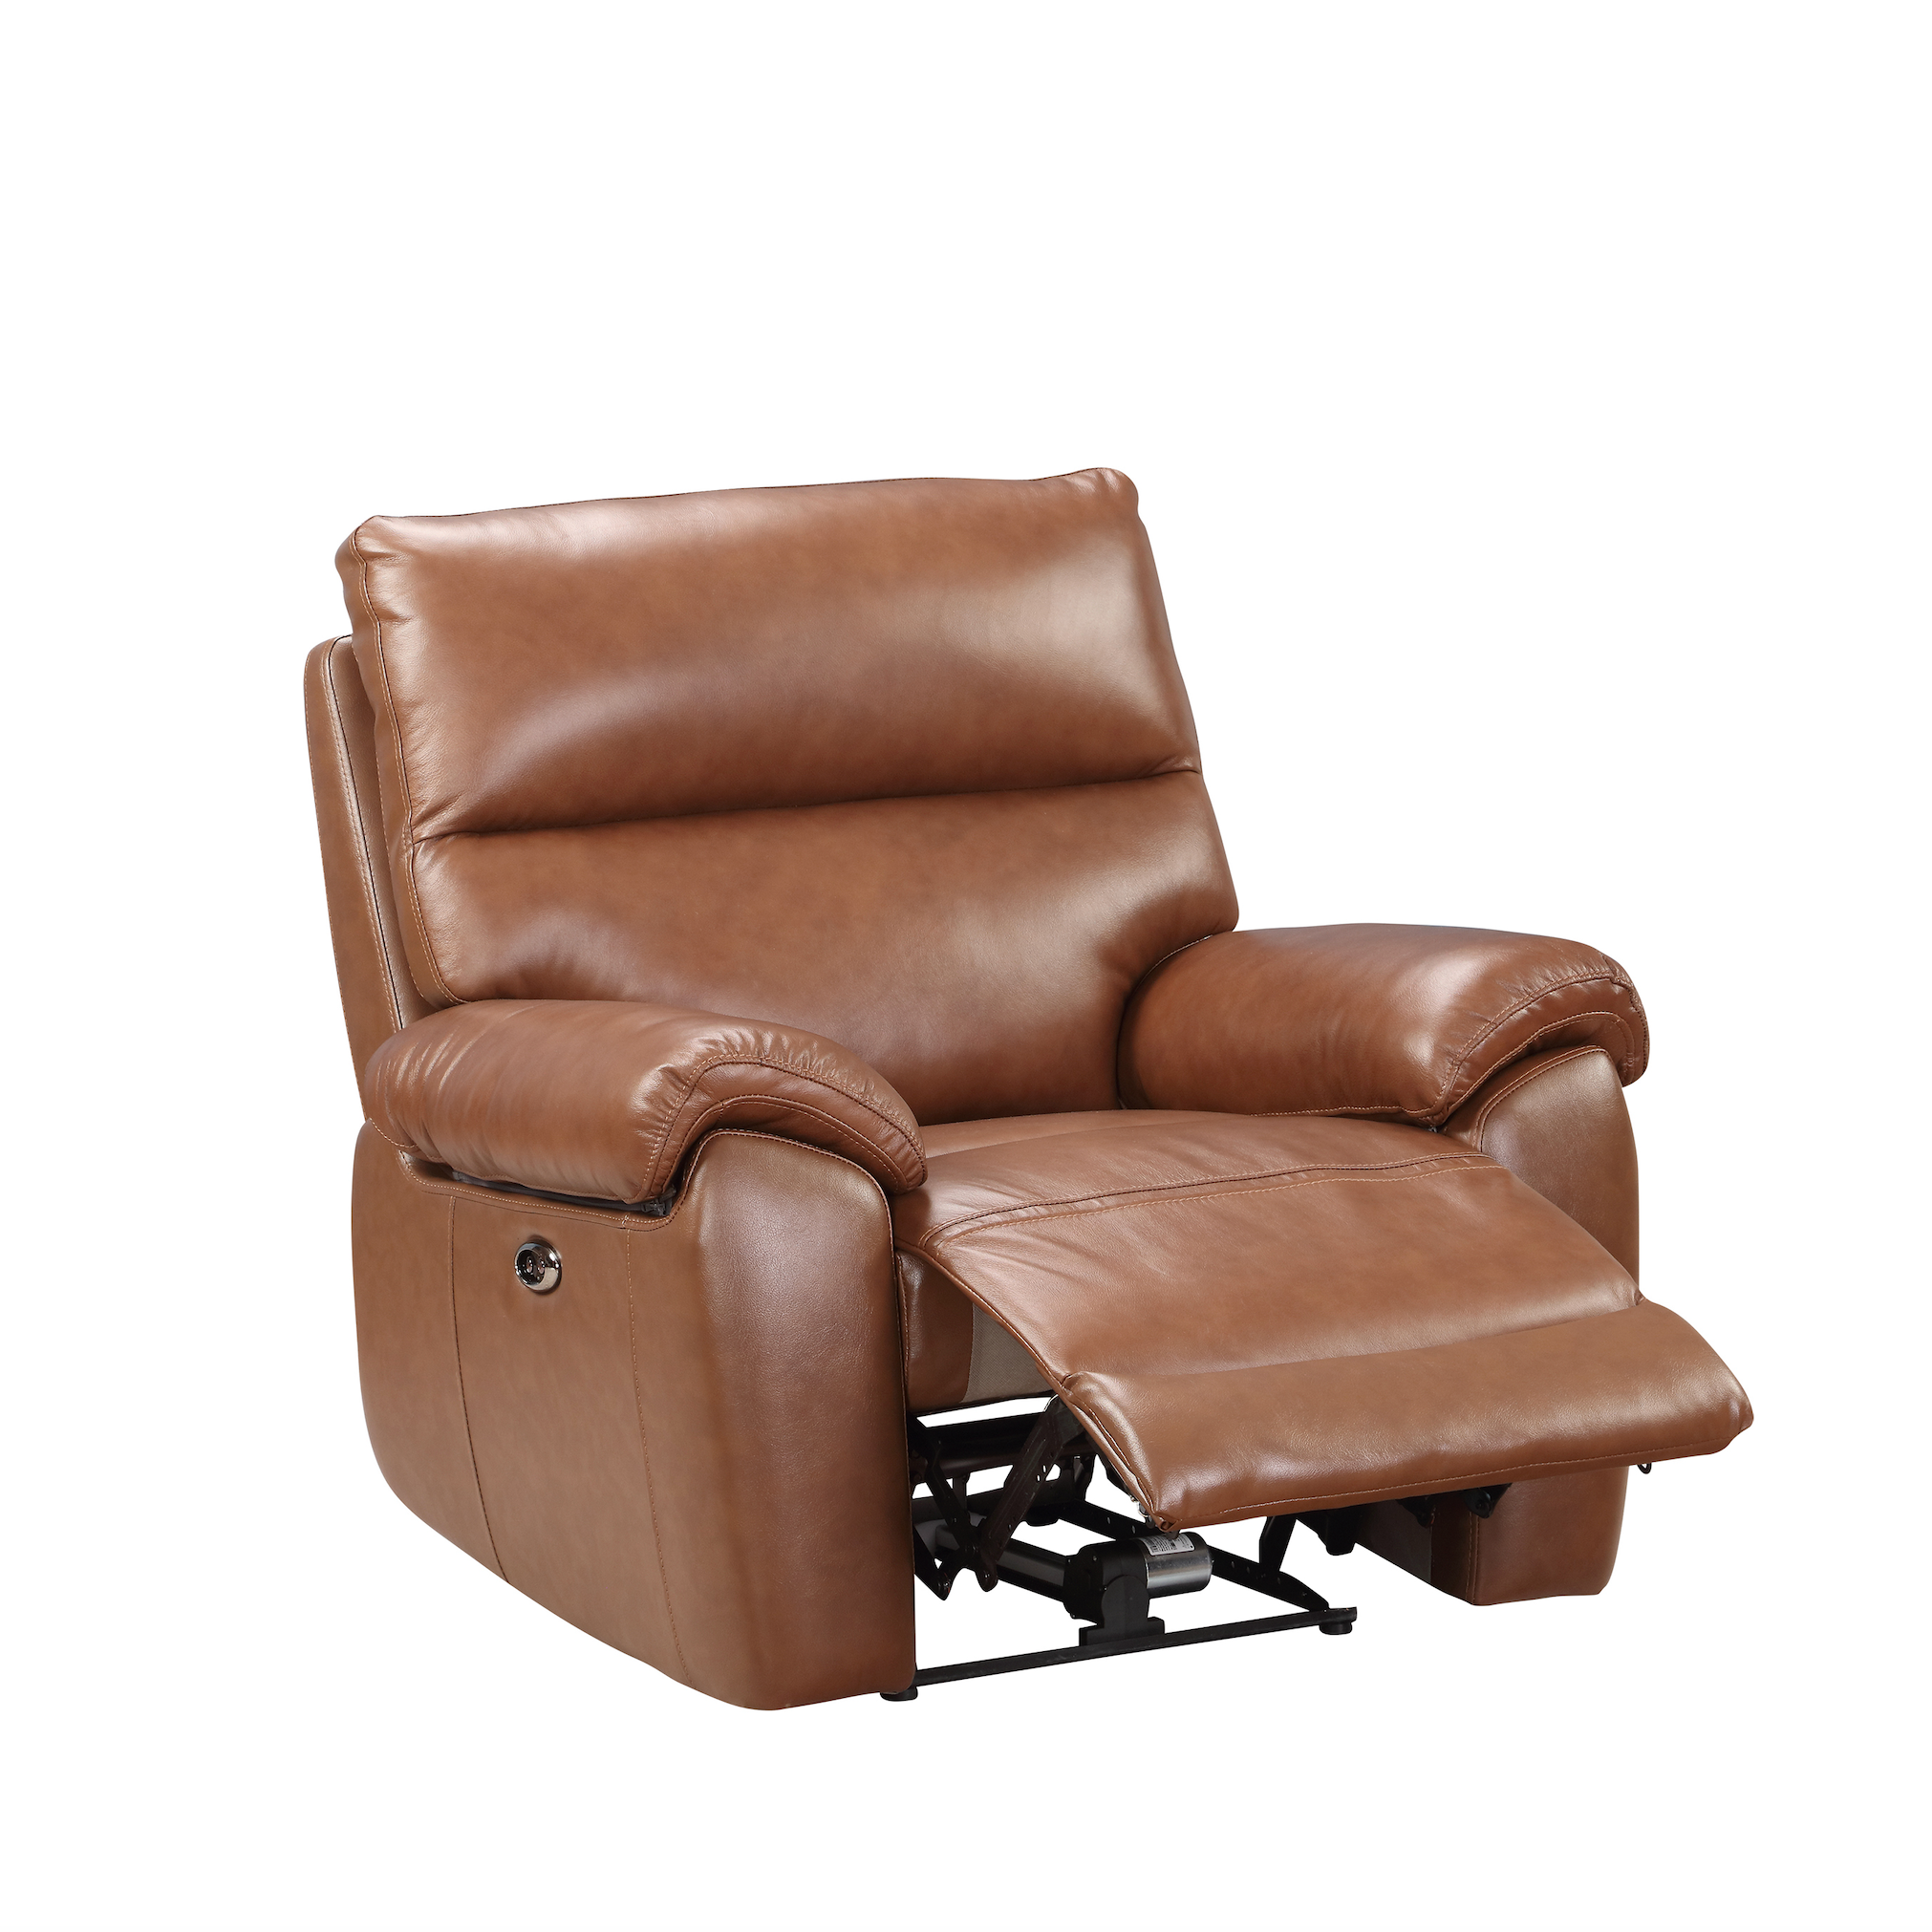 Rocco Manual Recliner Chair Chestnut Leather